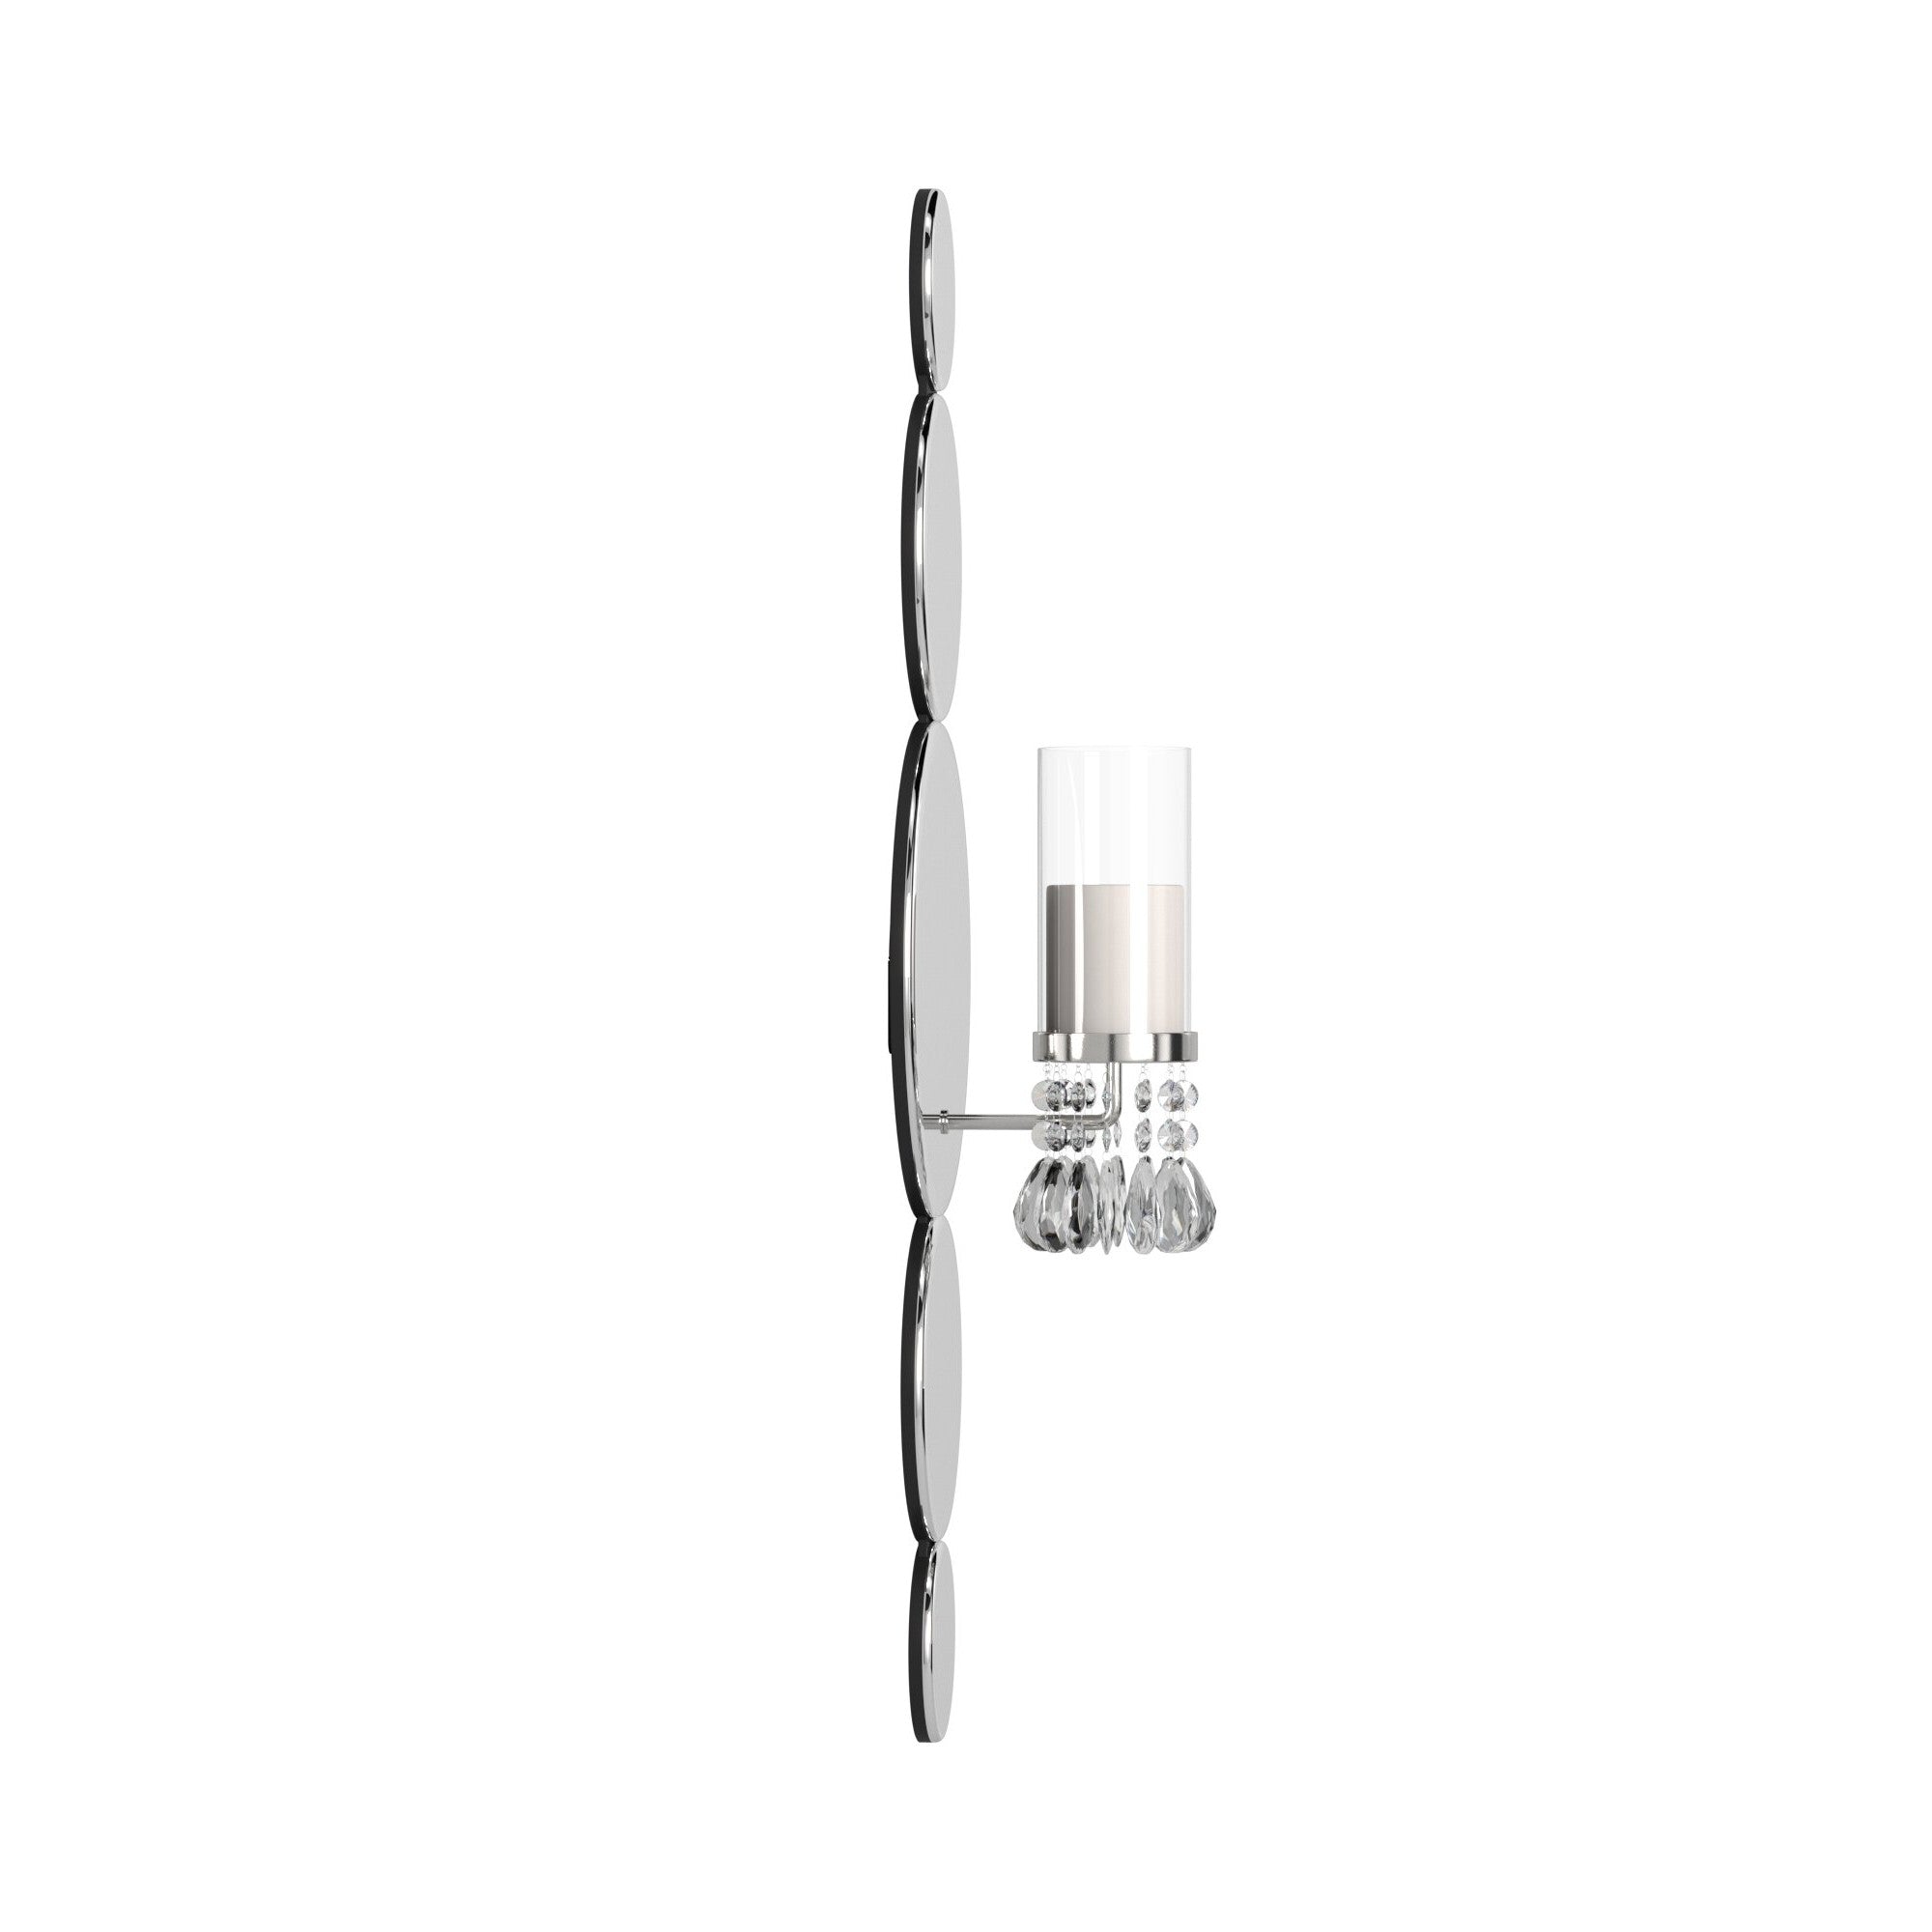 Silver and Clear Modern Bling Mirrored Wall Sconce